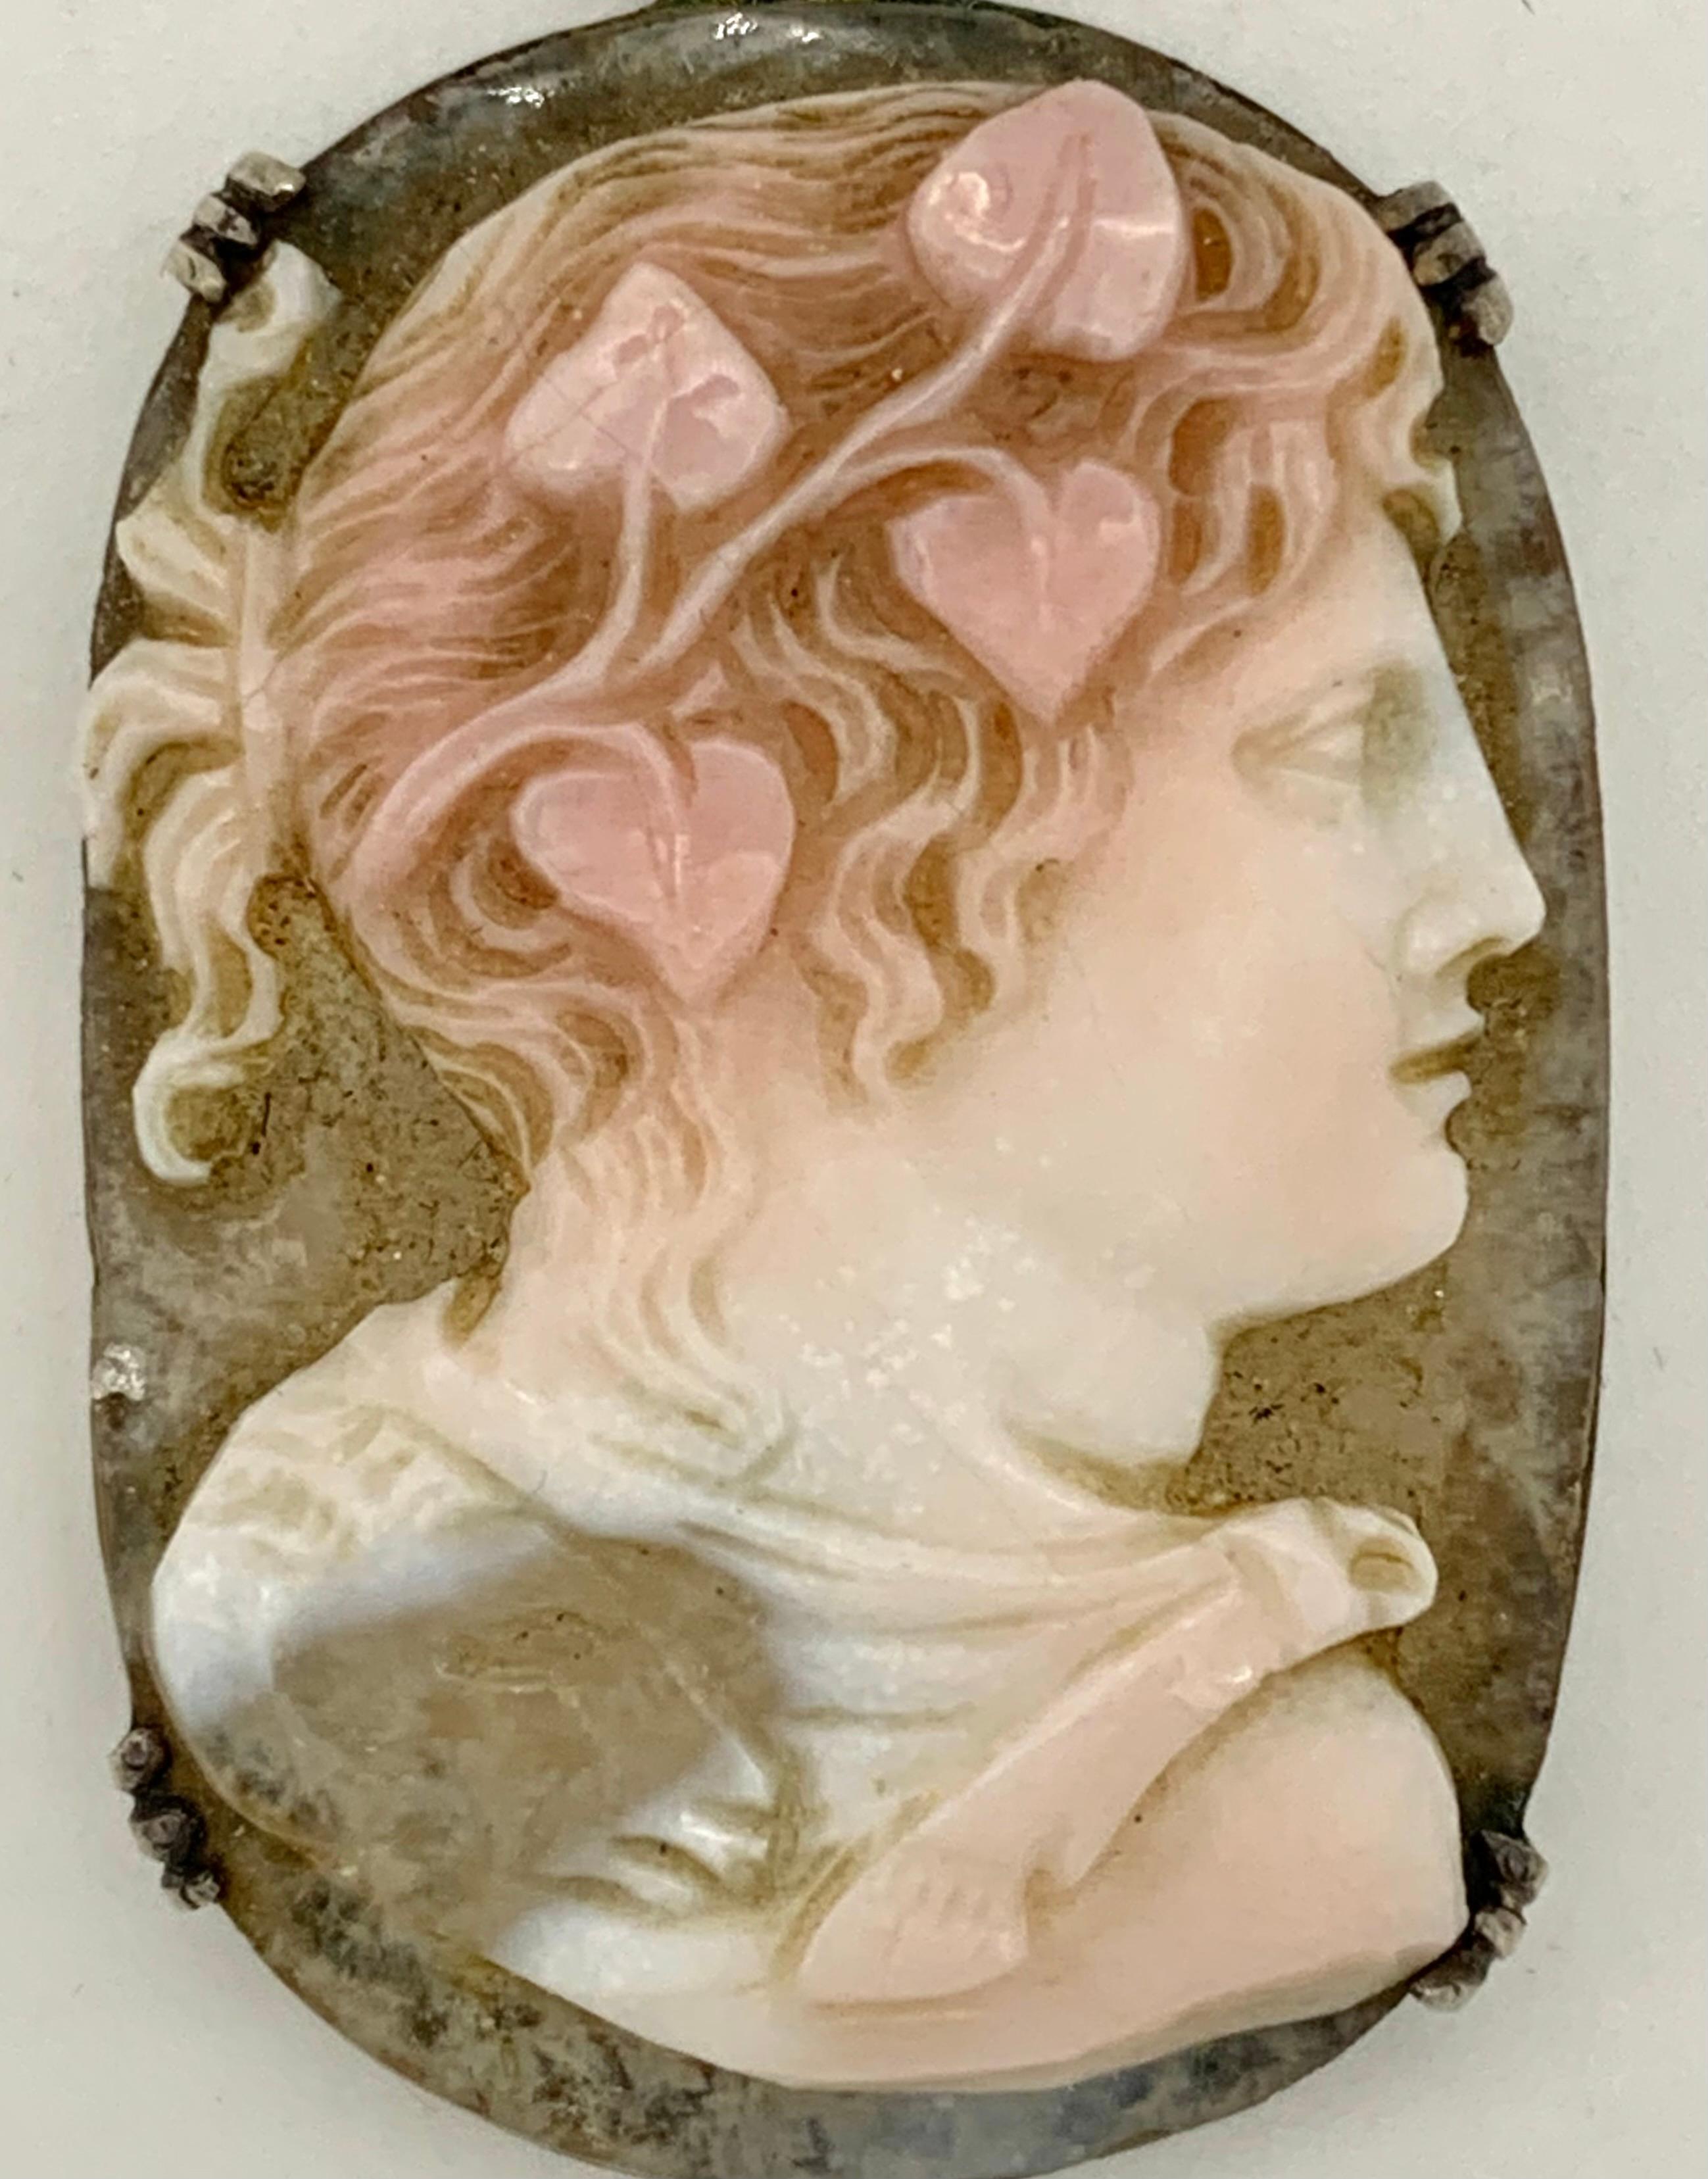 This fine hardstone cameo depicts a woman or men wearing a wreath of ivy. In Greek and Roman mythology the ivy wreath worn around head was the attribute of a followers of  Dyonisos and Baccus, the gods of wine , ecstasy and fertility. The cameo was